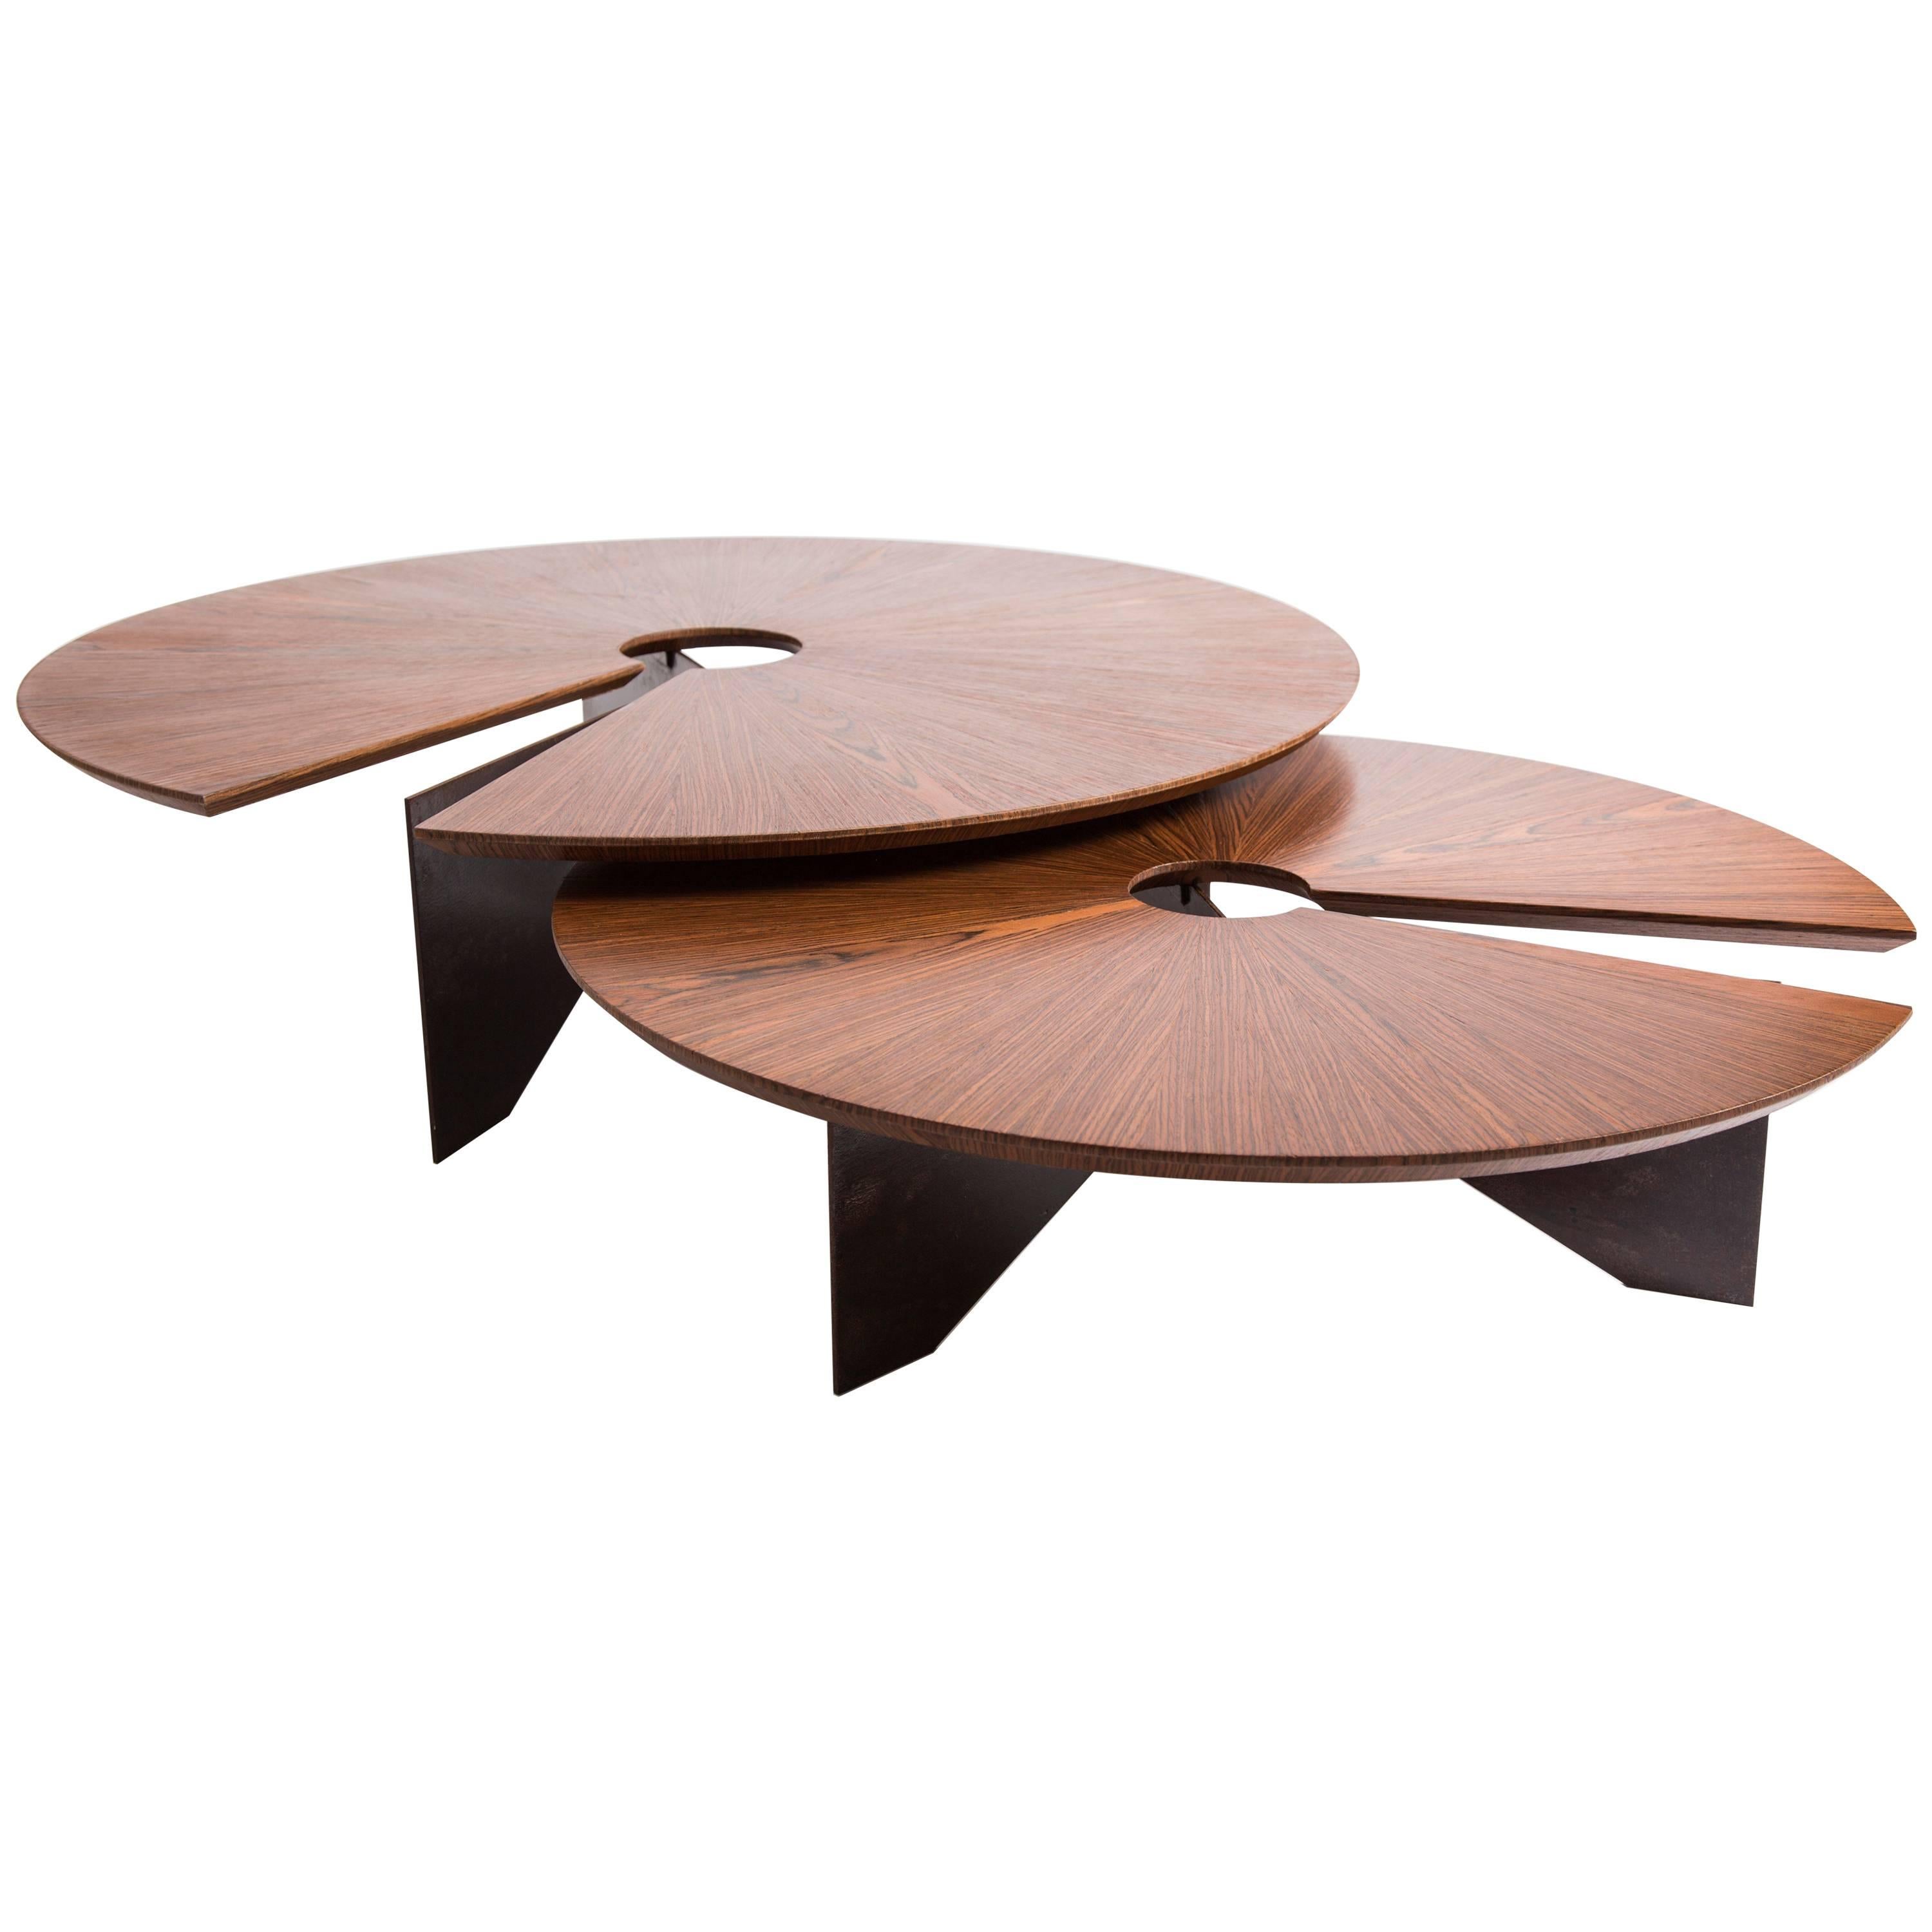 Lena Coffee Table, Size Large, Minimalist and Modern Style For Sale